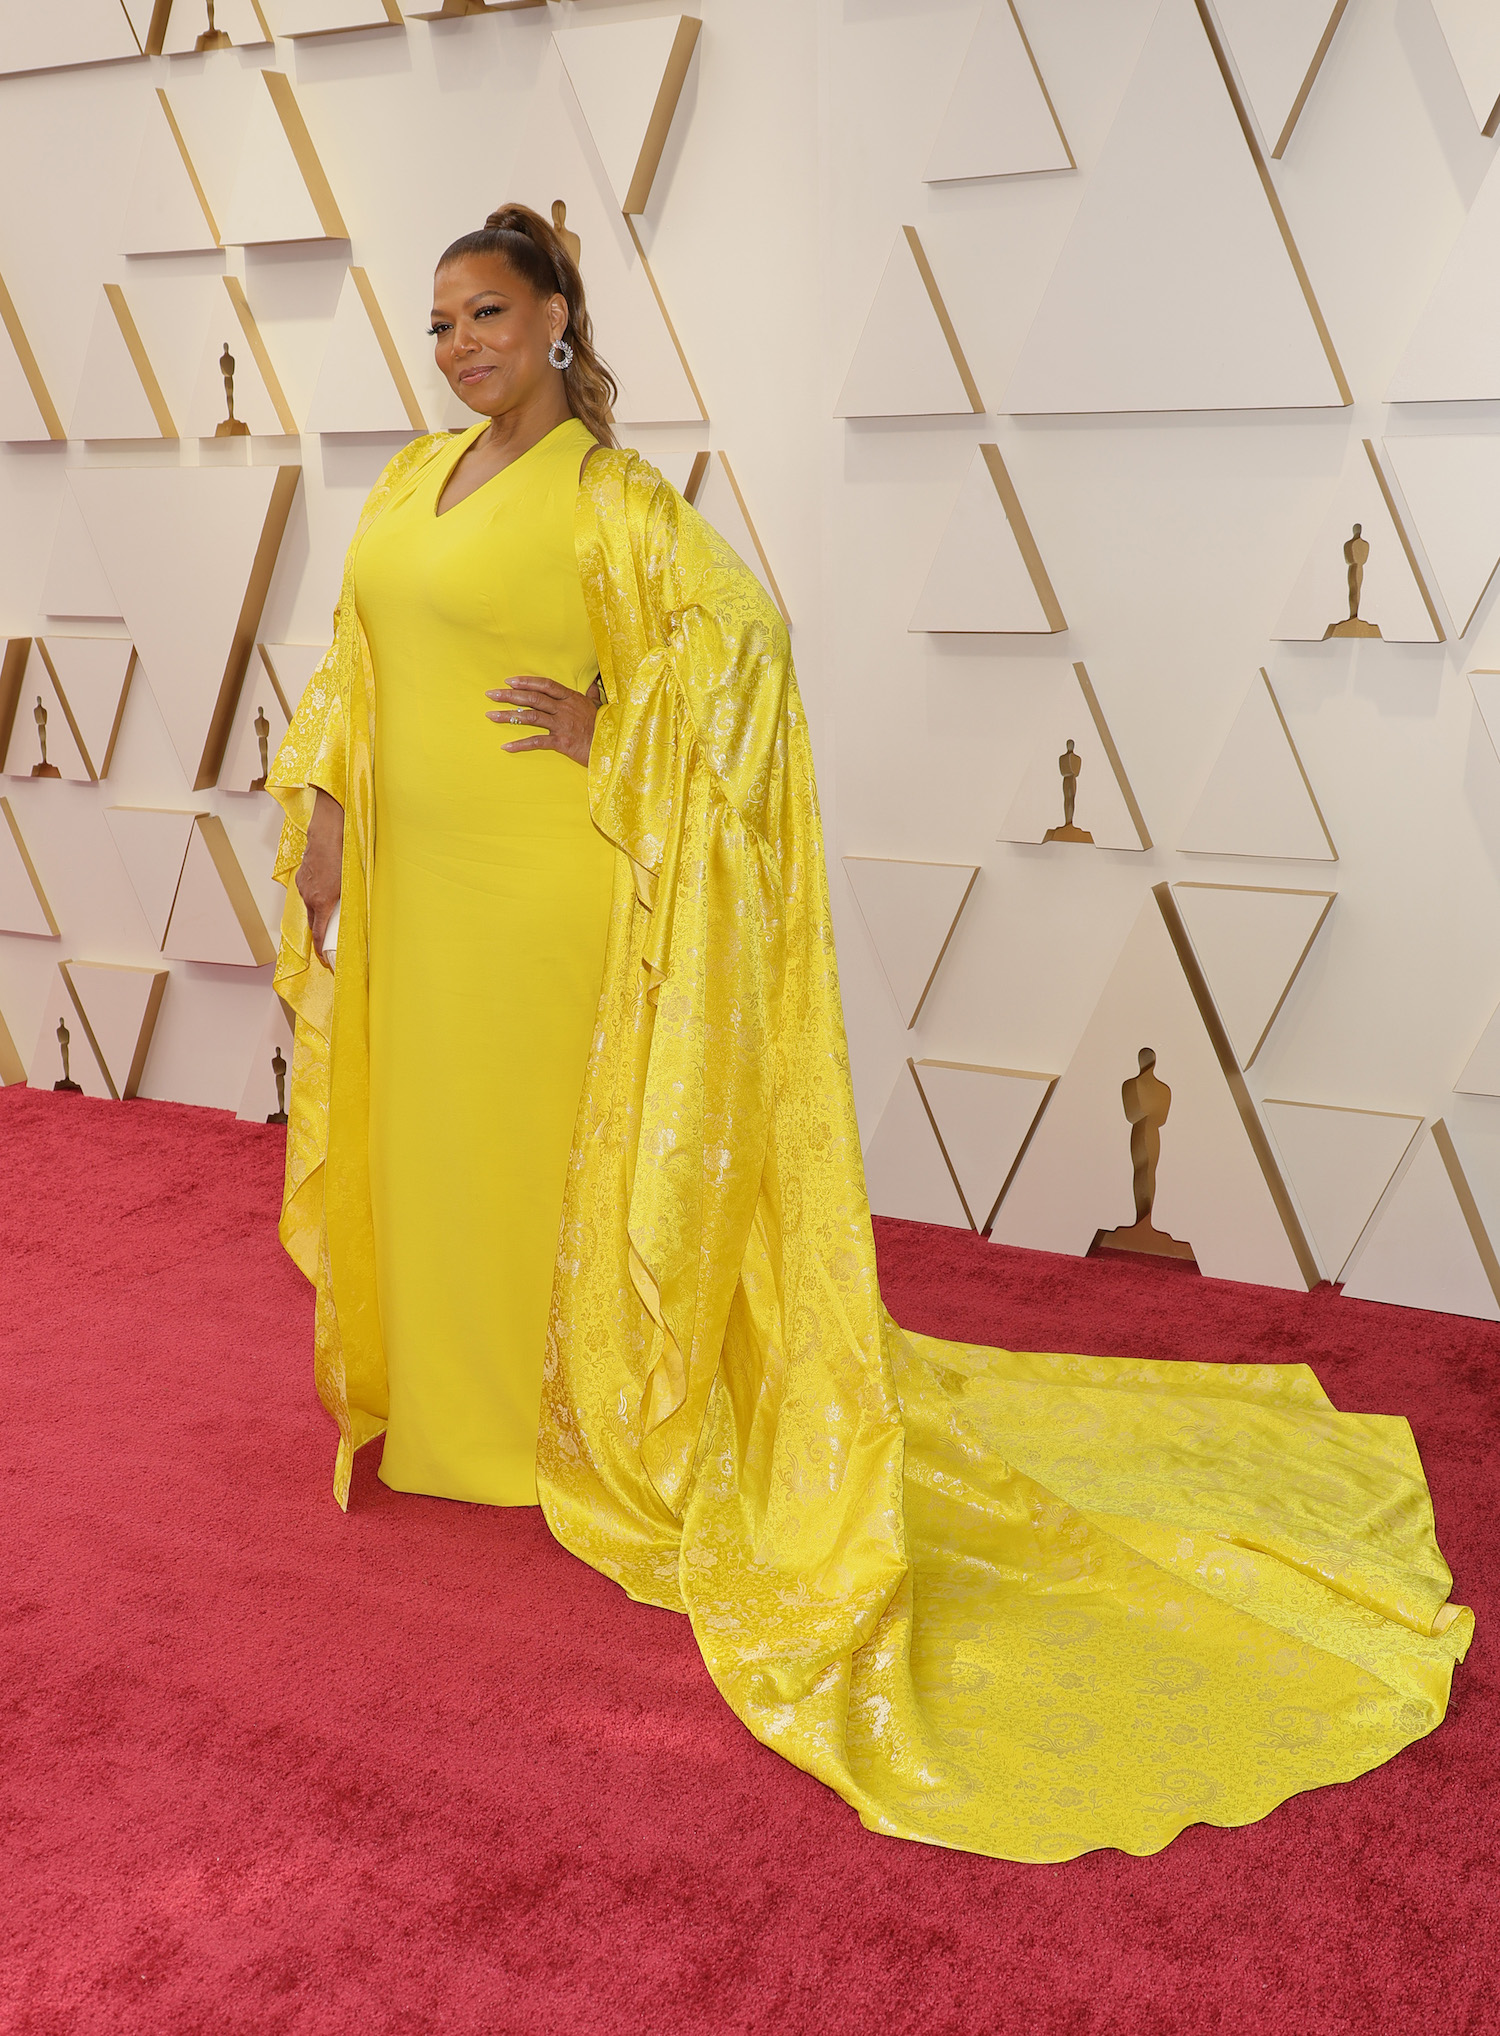 Queen Latifah at the Oscars 2022